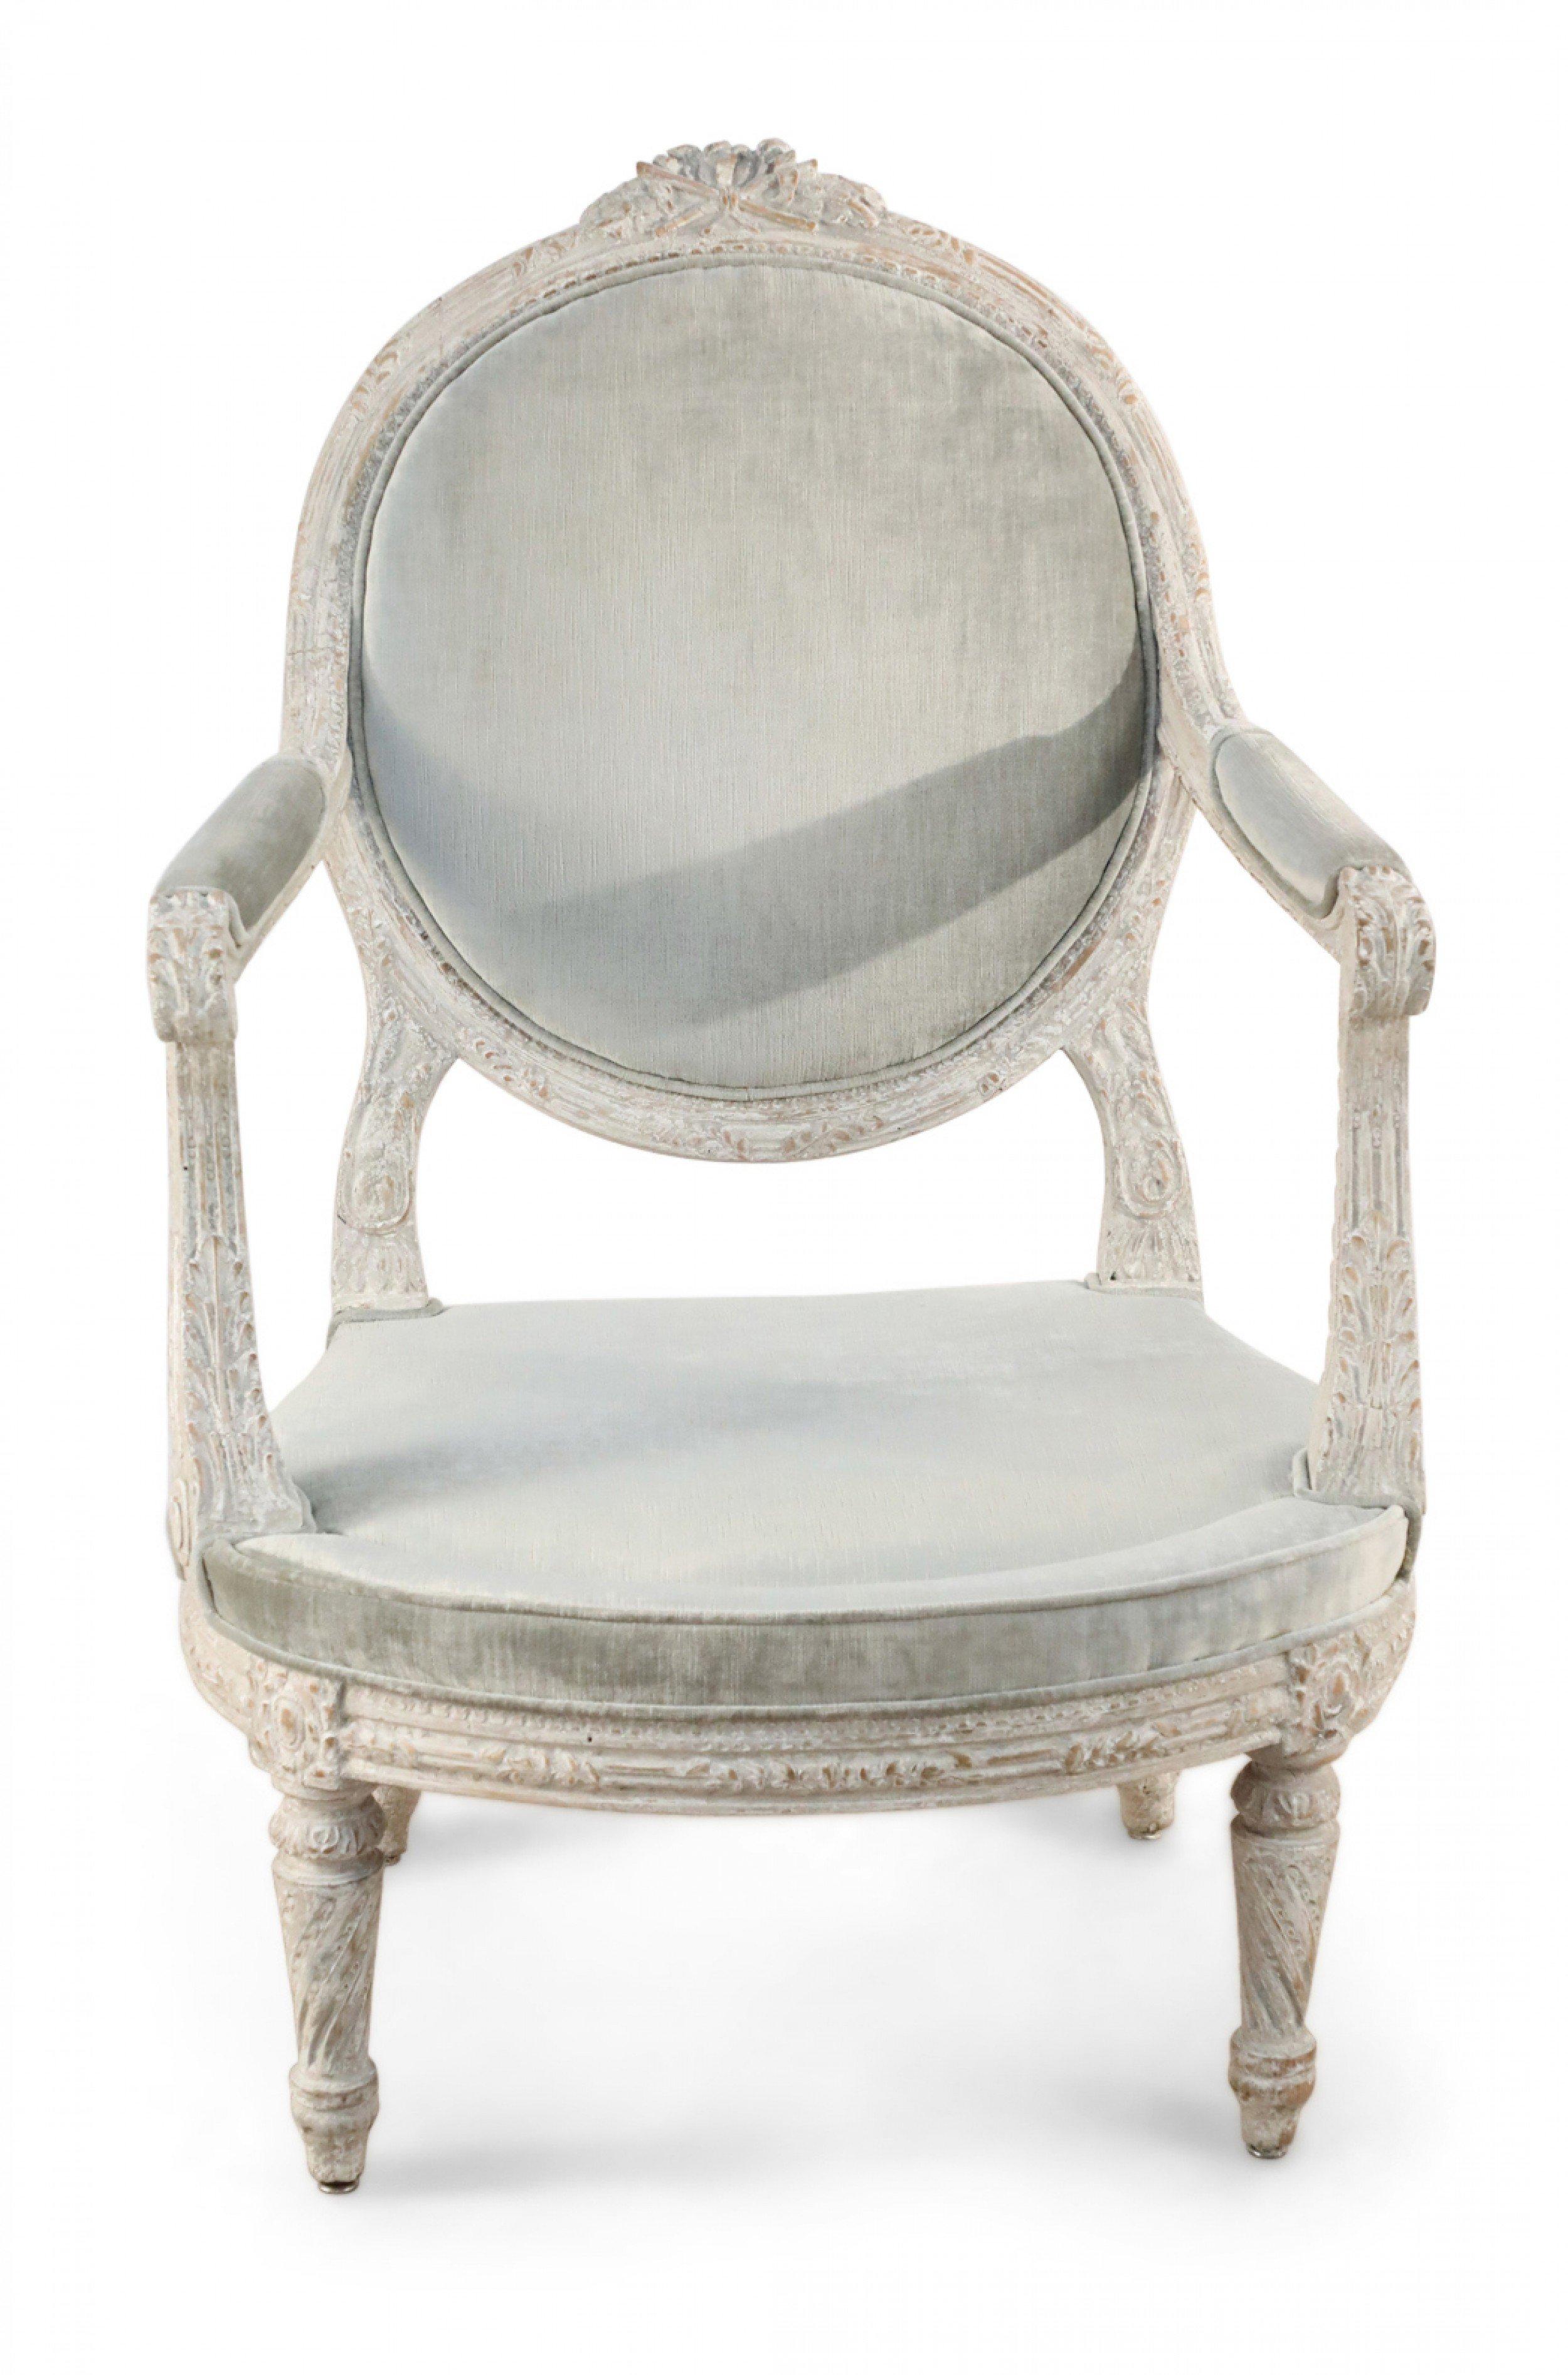 Pair of Italian Piedmontese (c.1785) open arm chairs with a rounded back having a carved floral crest, the frame carved with wheat, and the legs having a twisted fluting with light gray velvet upholstery. (PRICED AS Pair)
